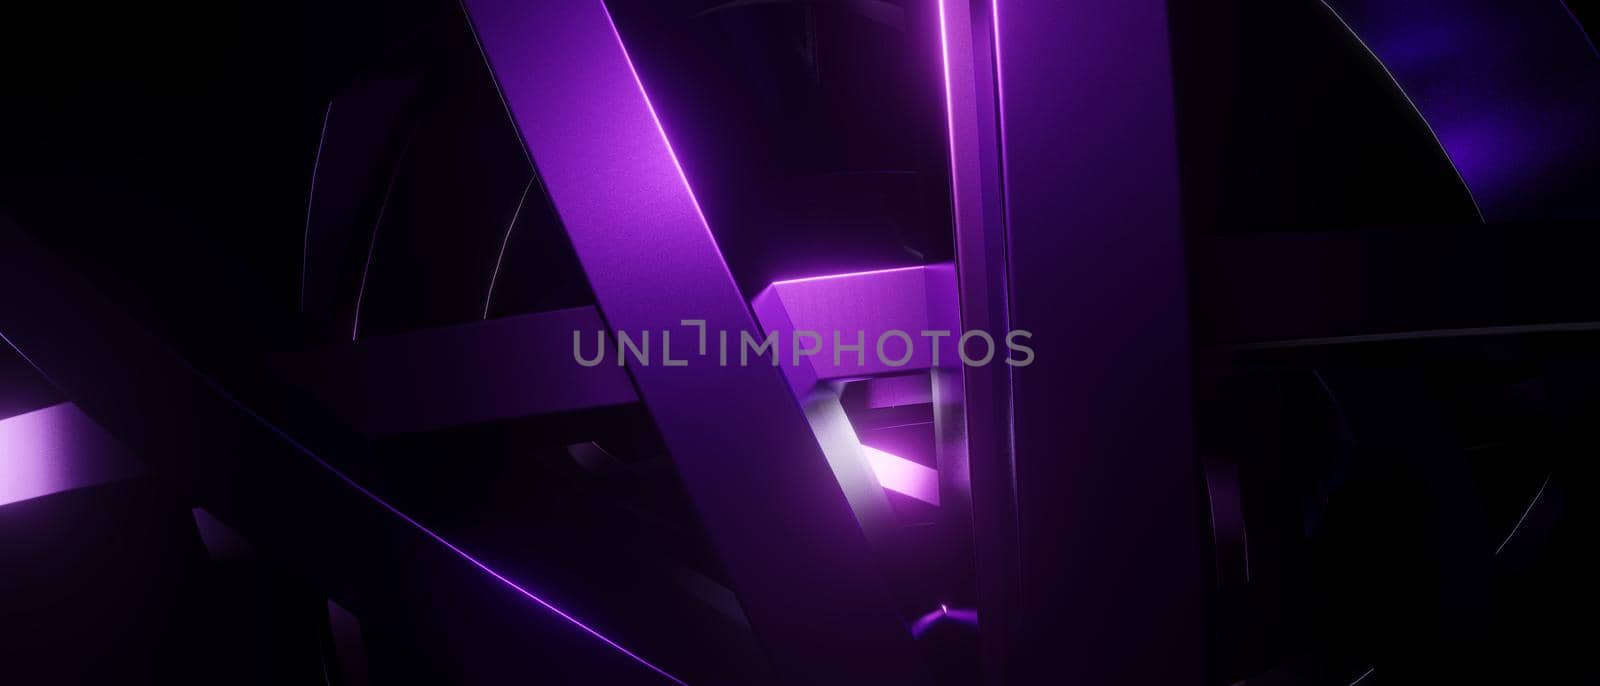 Creative Luxurious Shiny Metallic Violet Abstract Background 3D Rendering